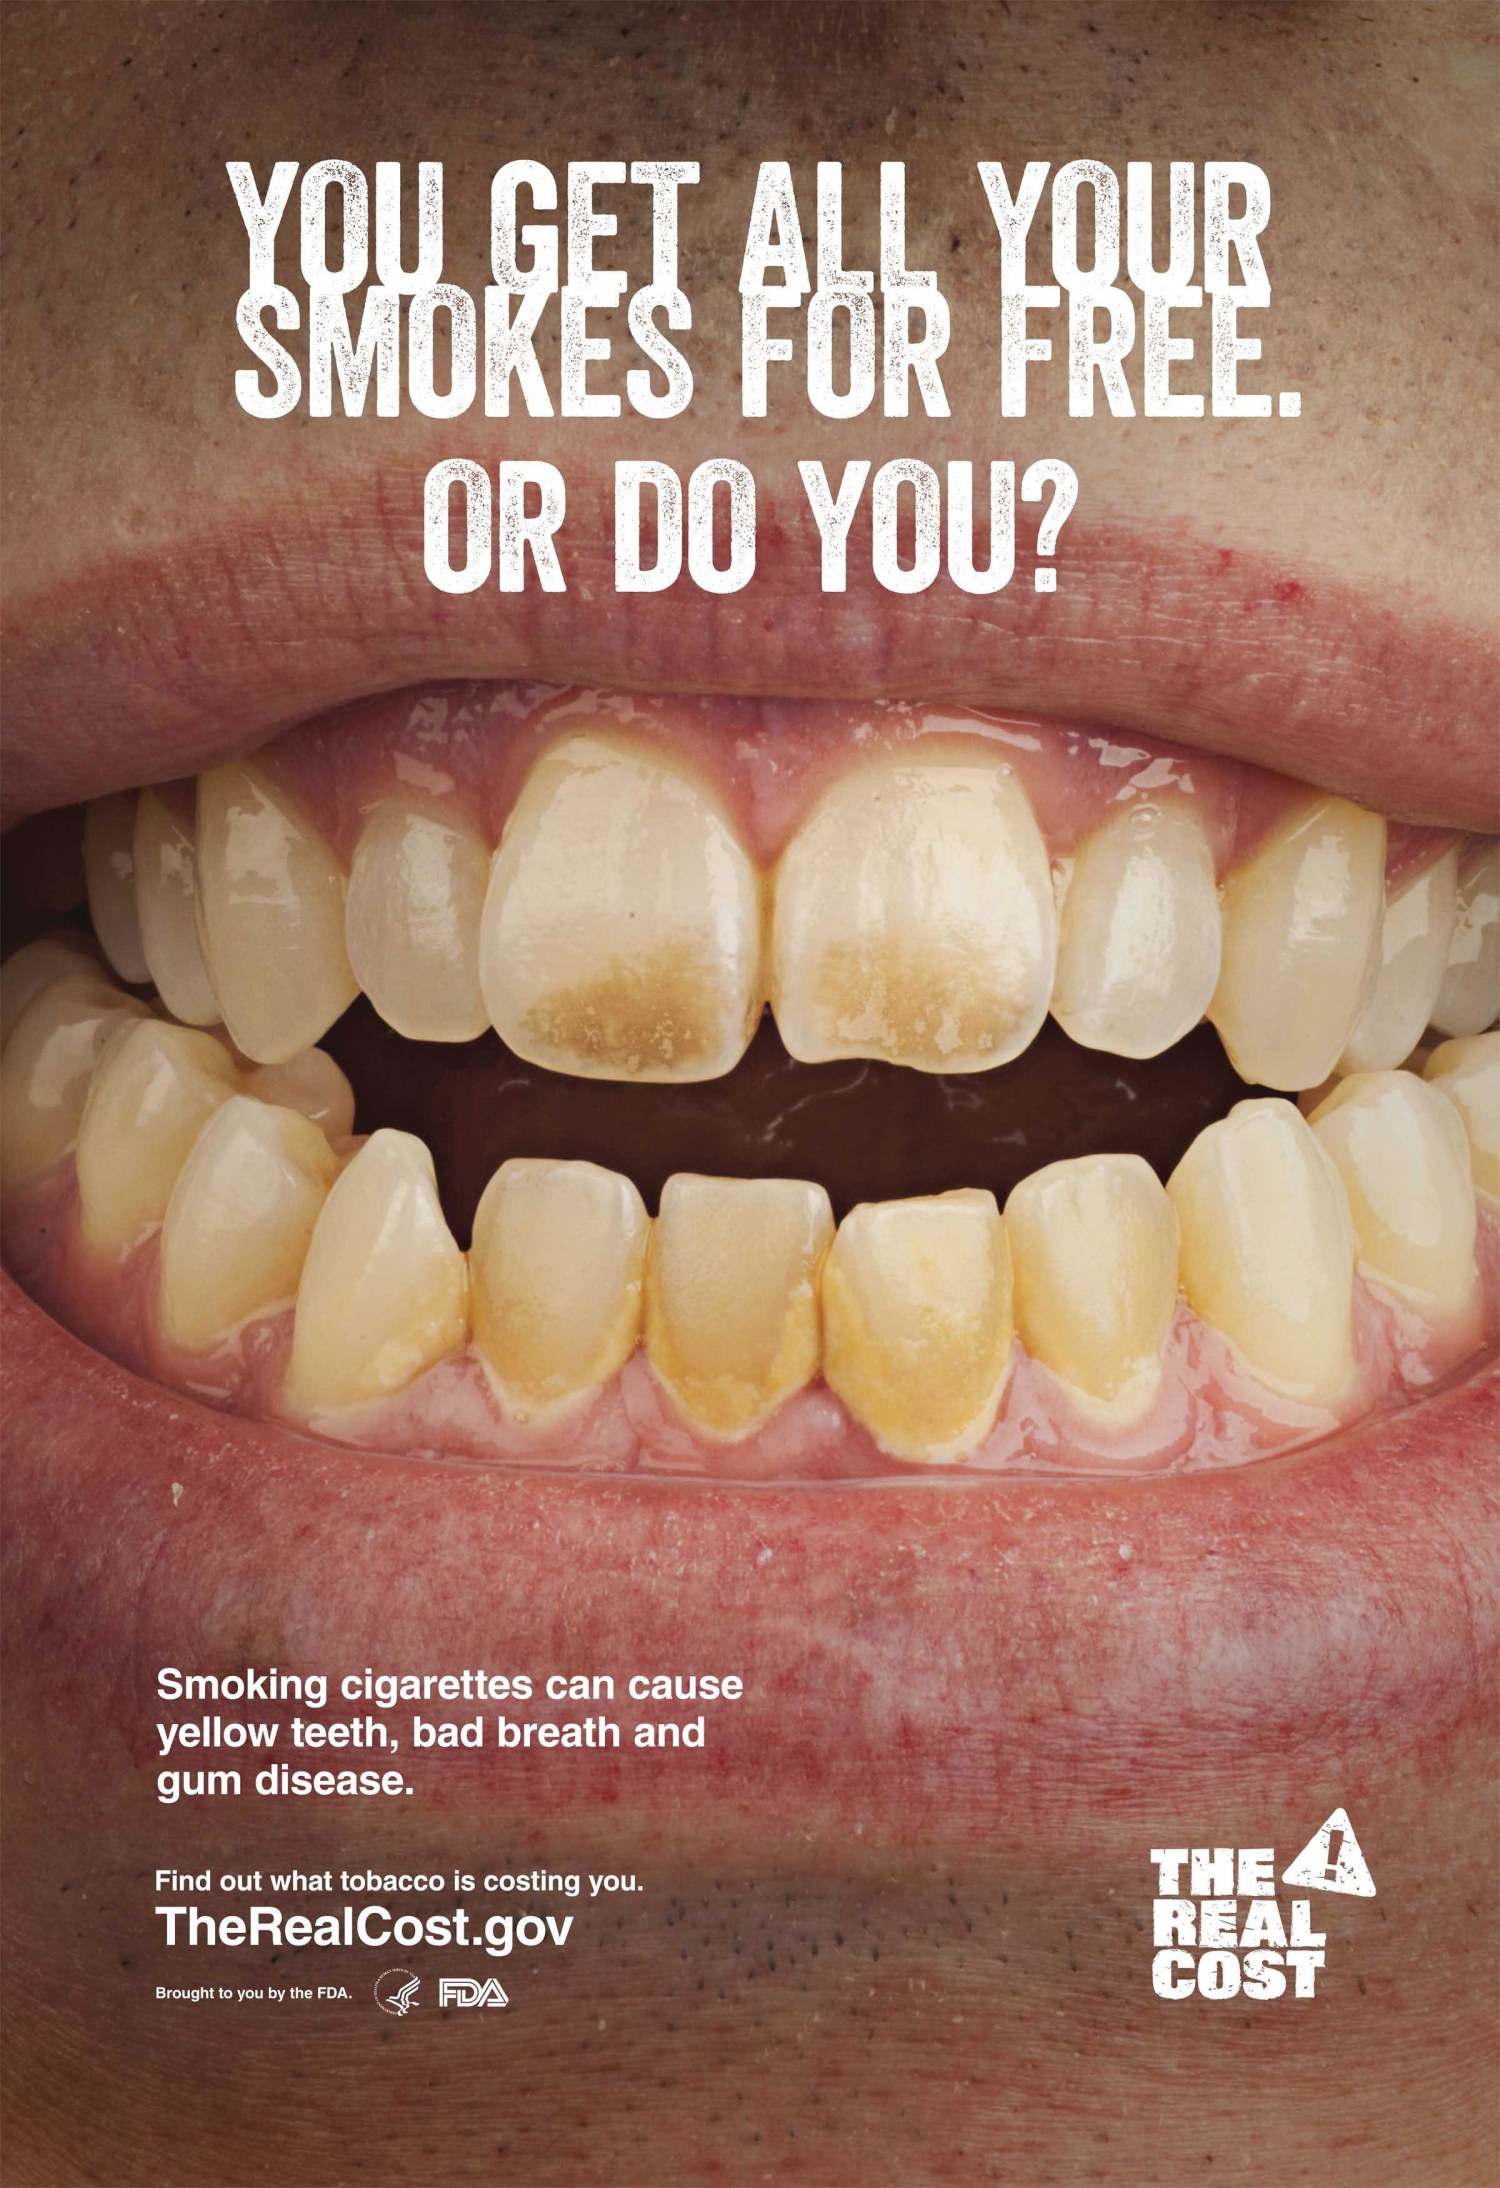 FDA Targets Teens In First Anti-Smoking Campaign